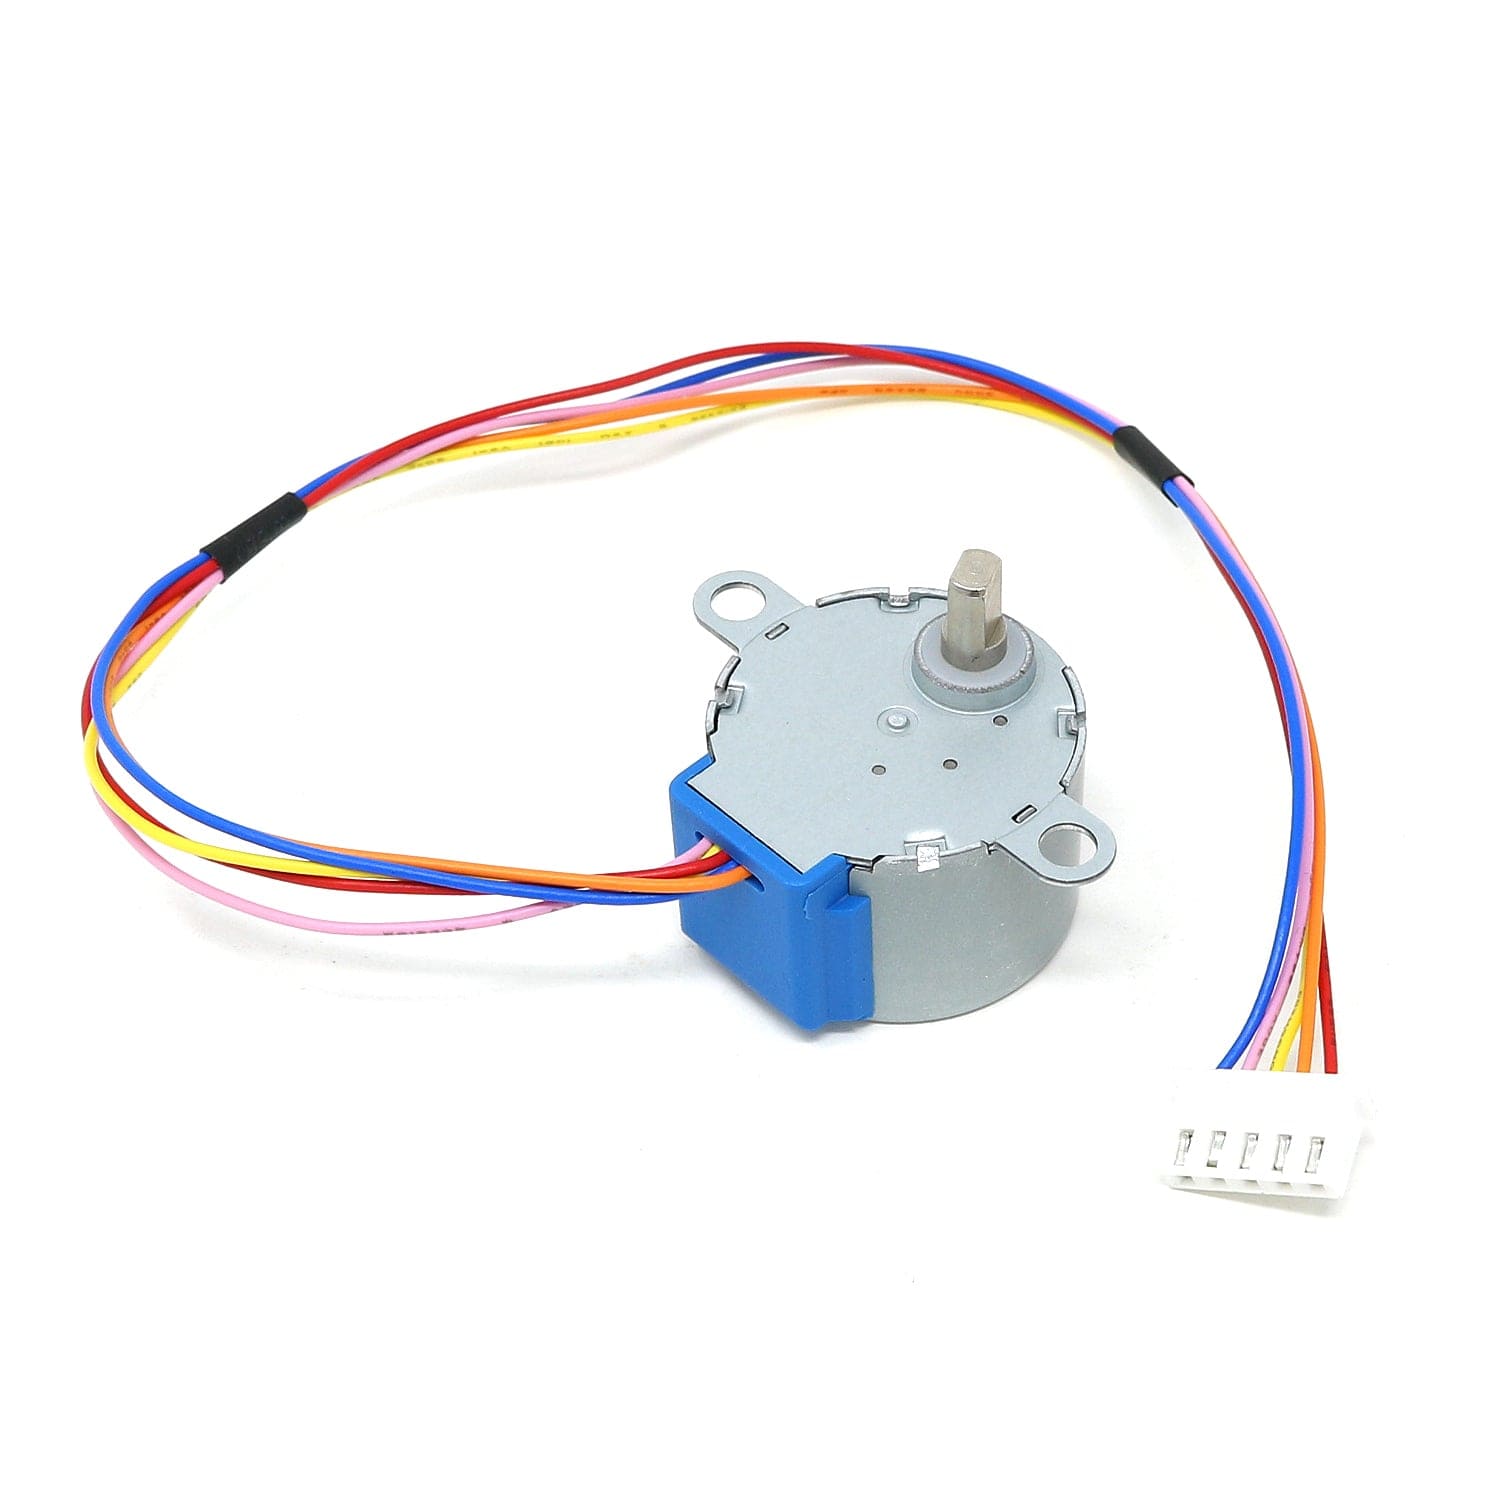 Small Reduction Stepper Motor - 12VDC 32-Step 1/16 Gearing - The Pi Hut